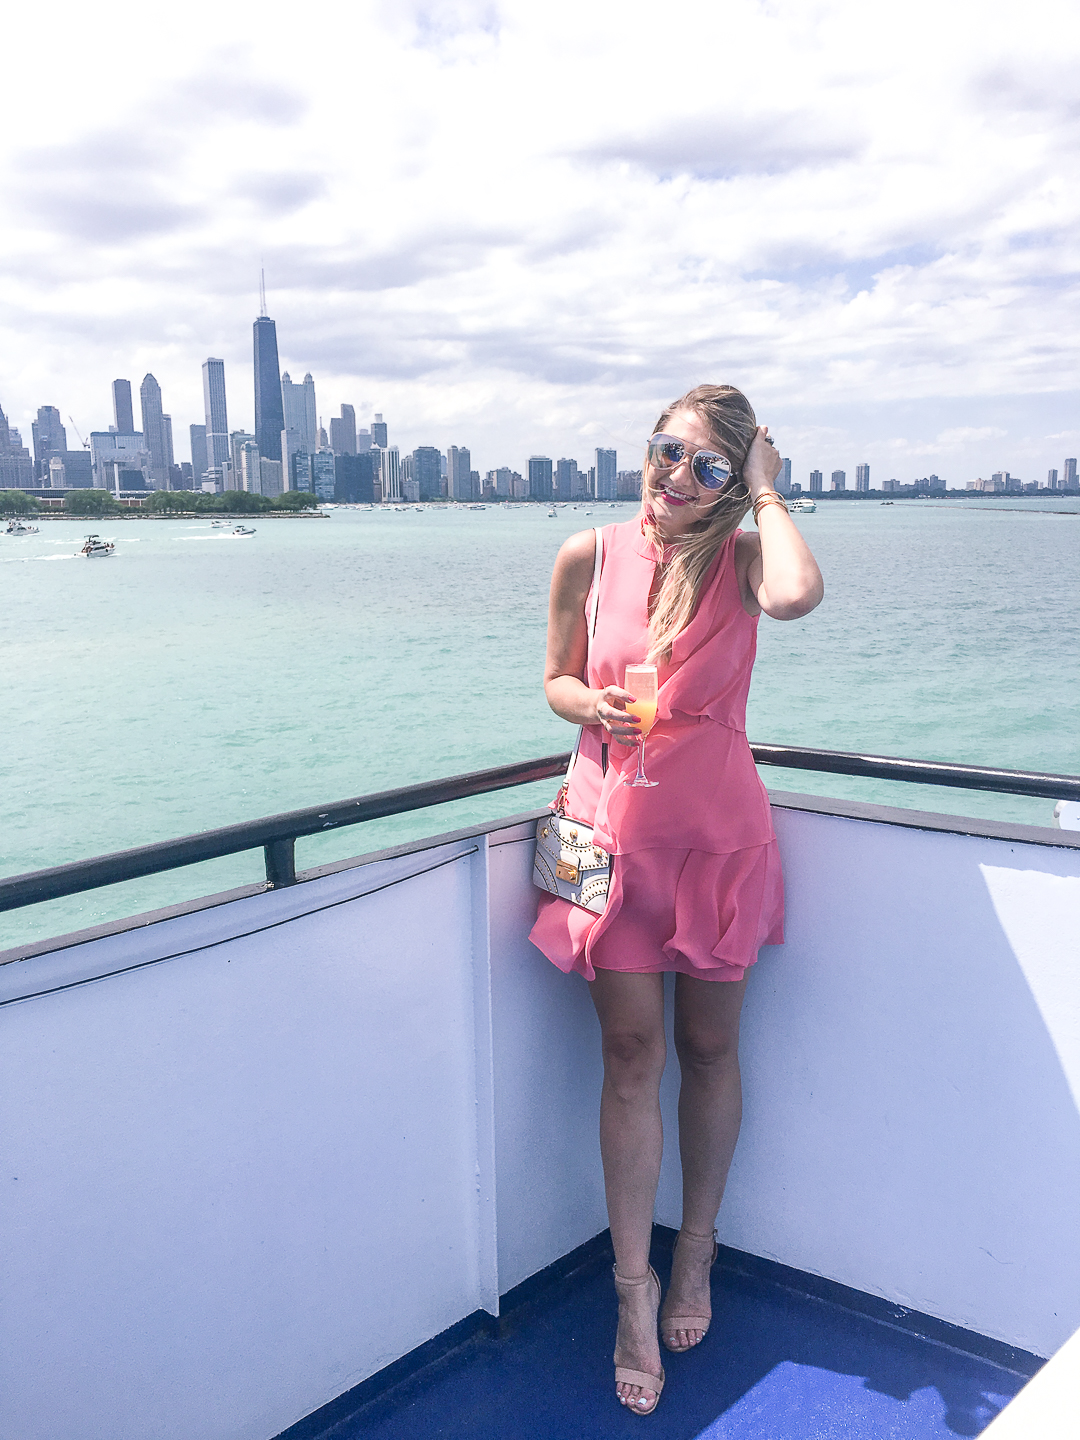 what to do in chicago - yacht cruise